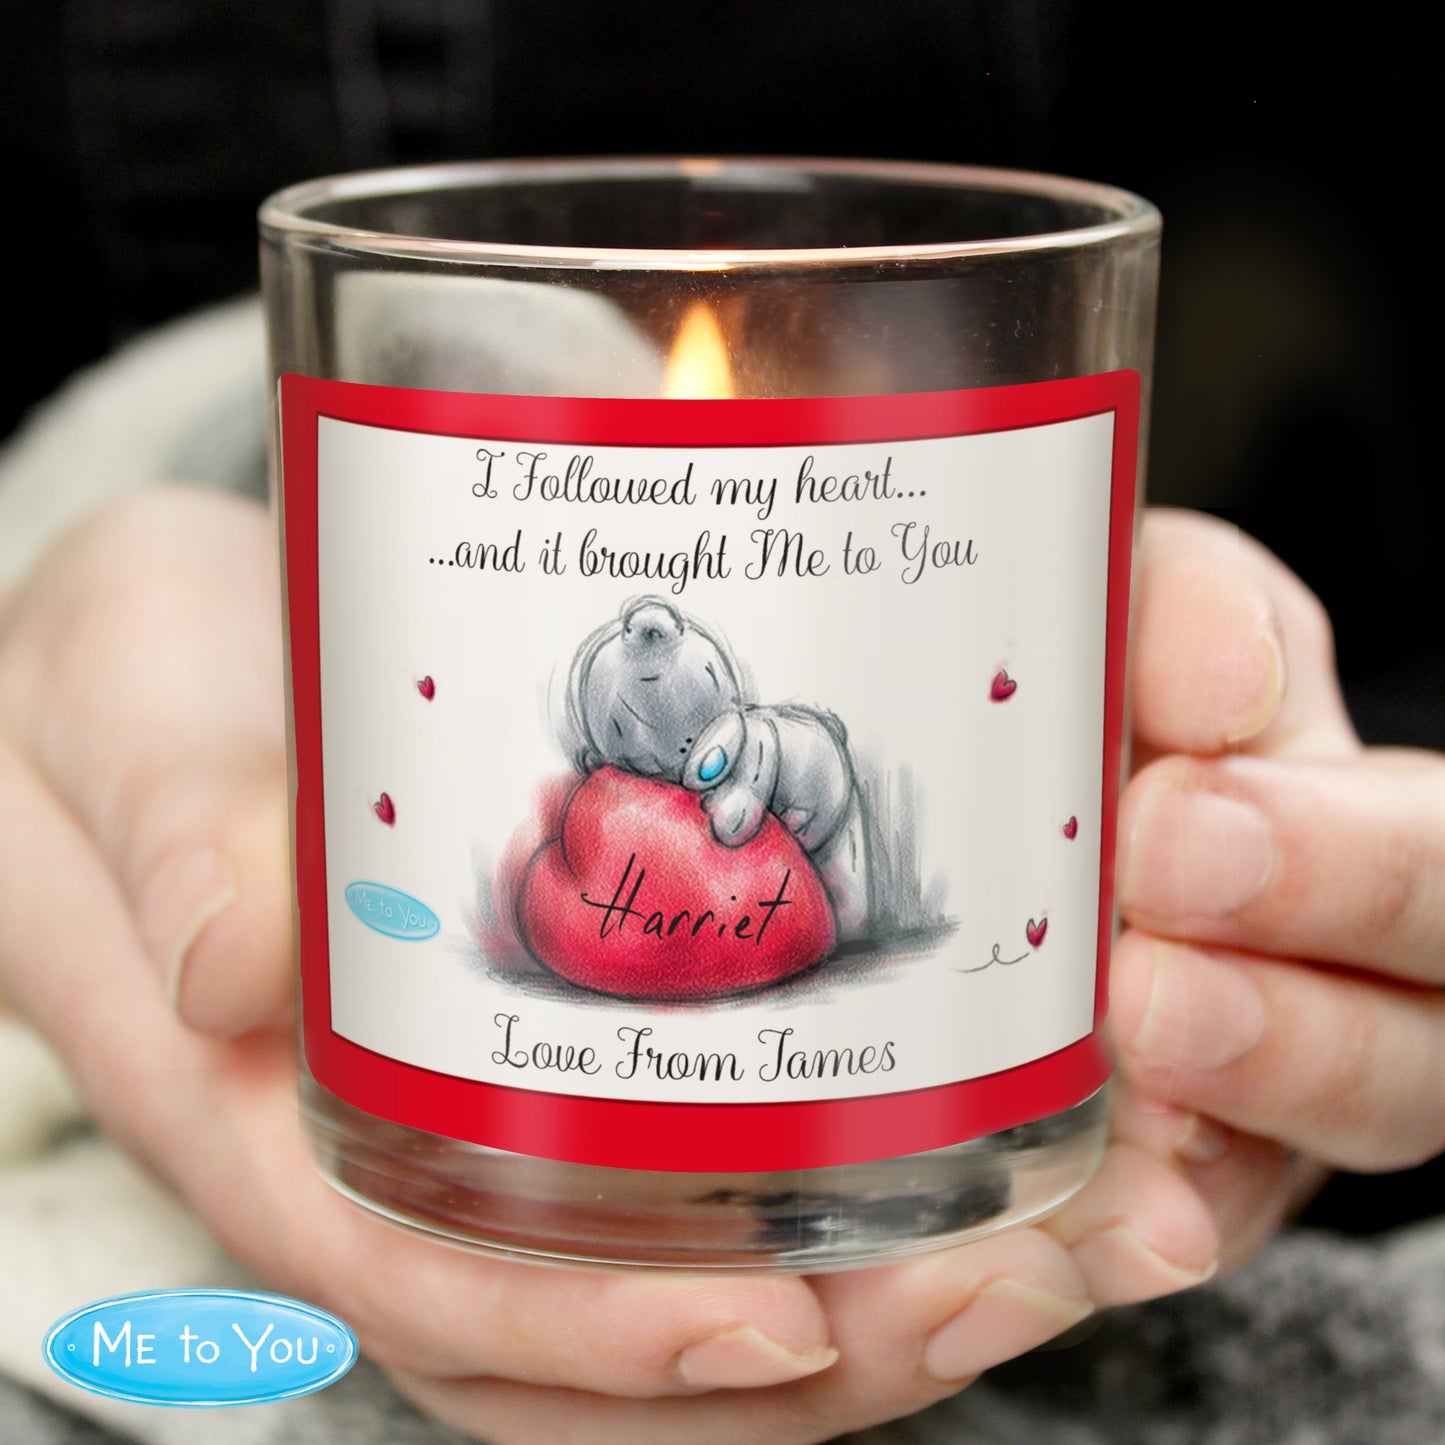 Personalised 'Me To You' Heart Scented Jar Candle - Perfect for Valentine's Day